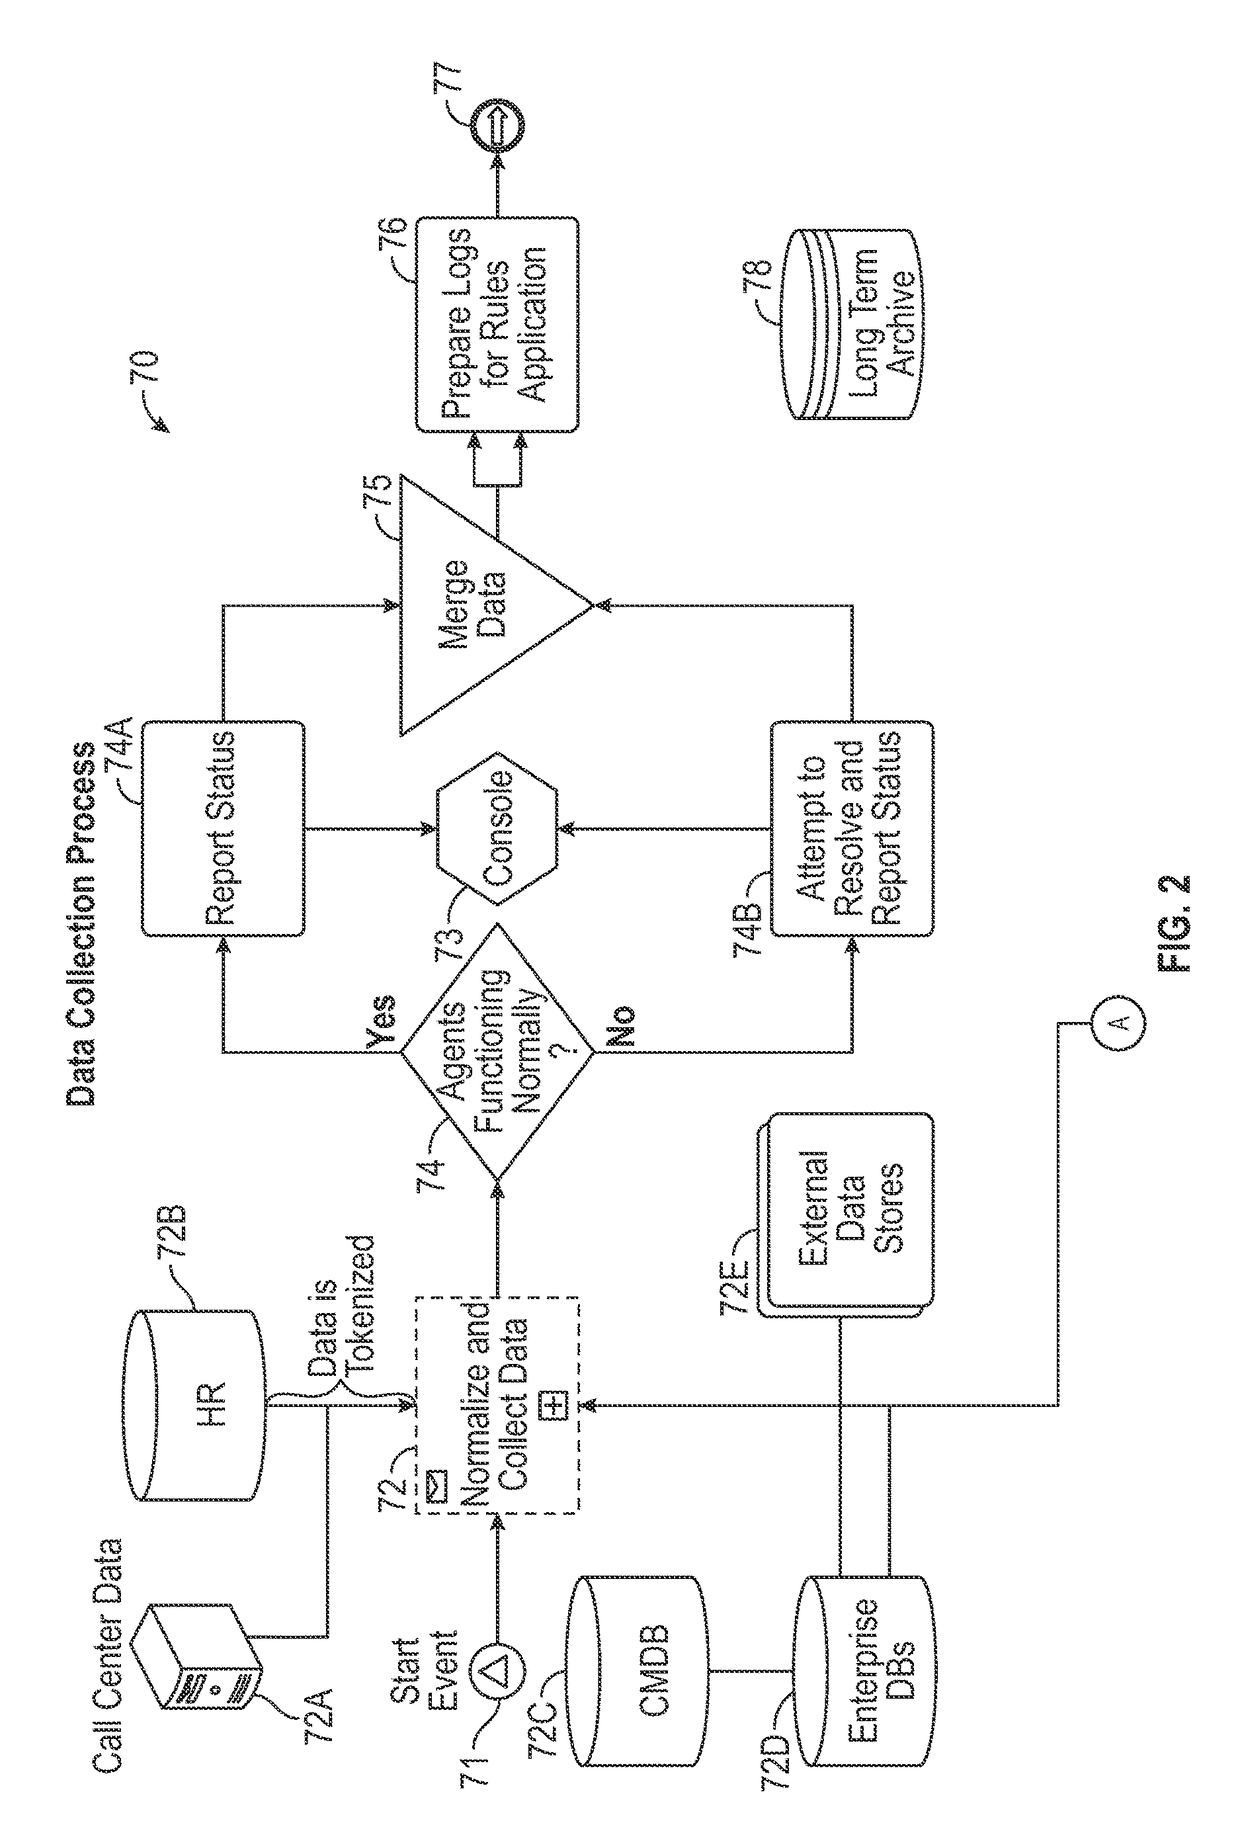 System and method for predicting impending cyber security events using multi channel behavioral analysis in a distributed computing environment